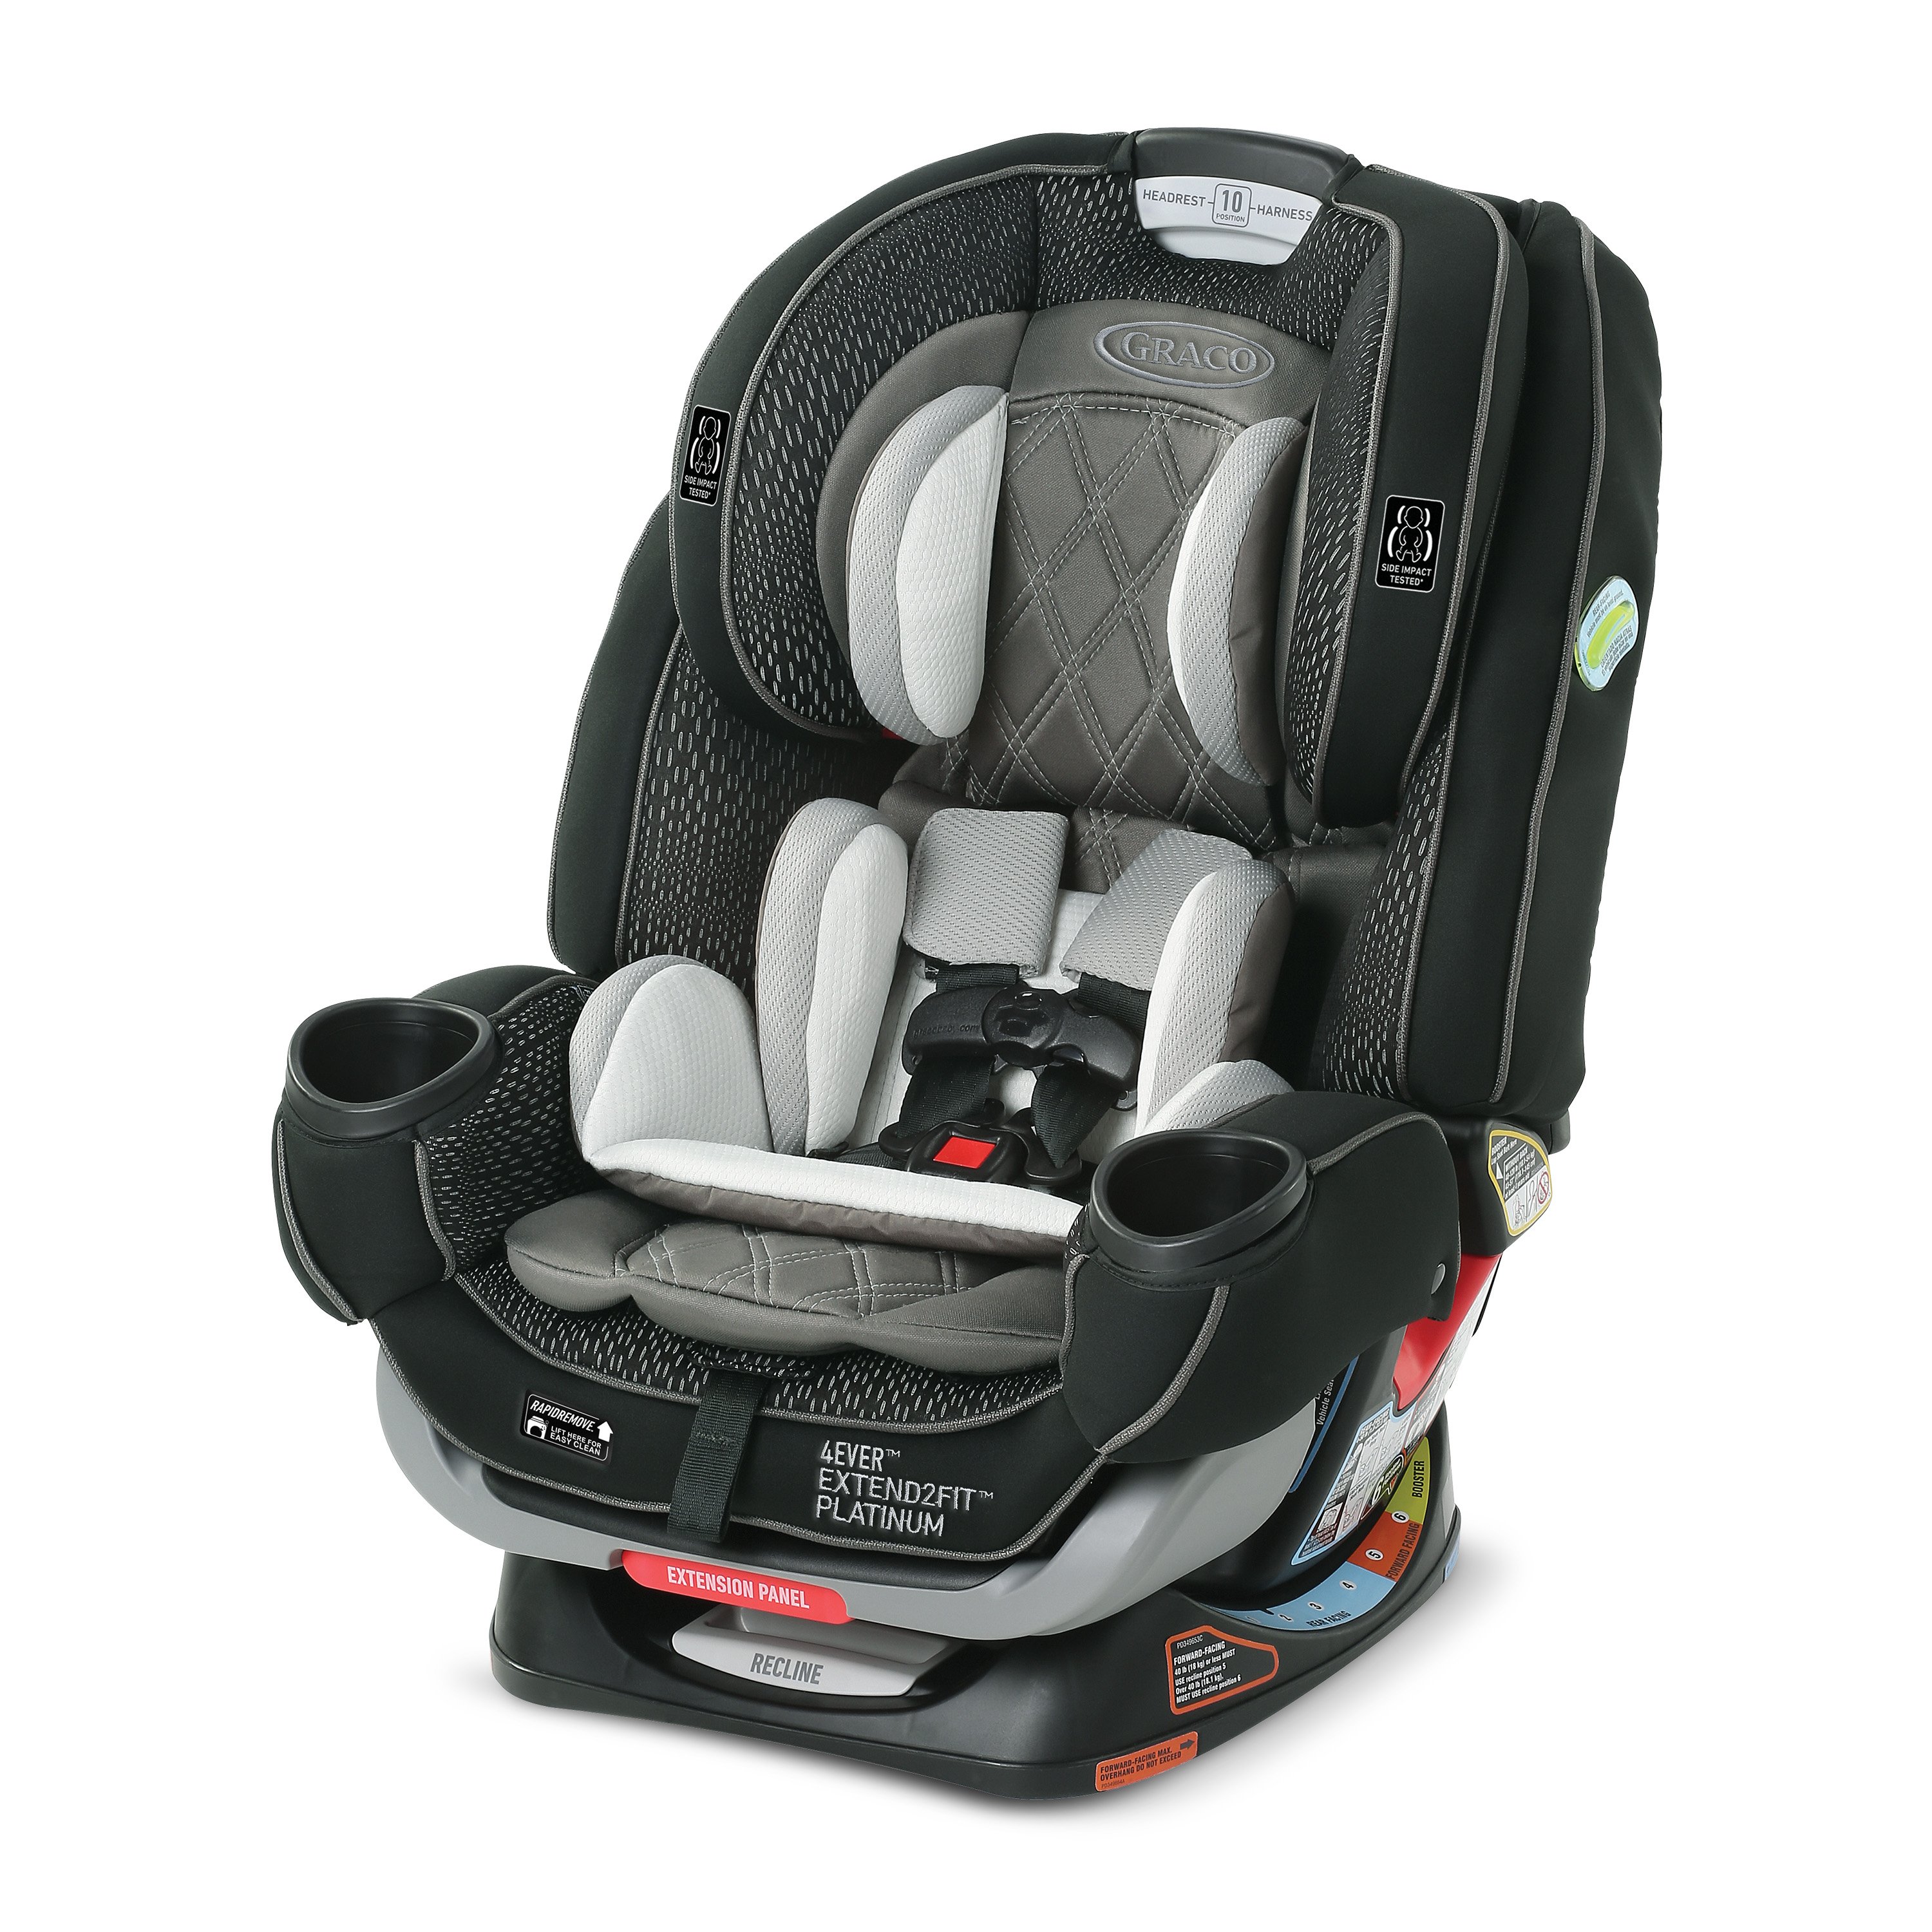 Graco Extend2fit Convertible Car Seat, Graco Extend2fit Convertible Car Seat Stroller